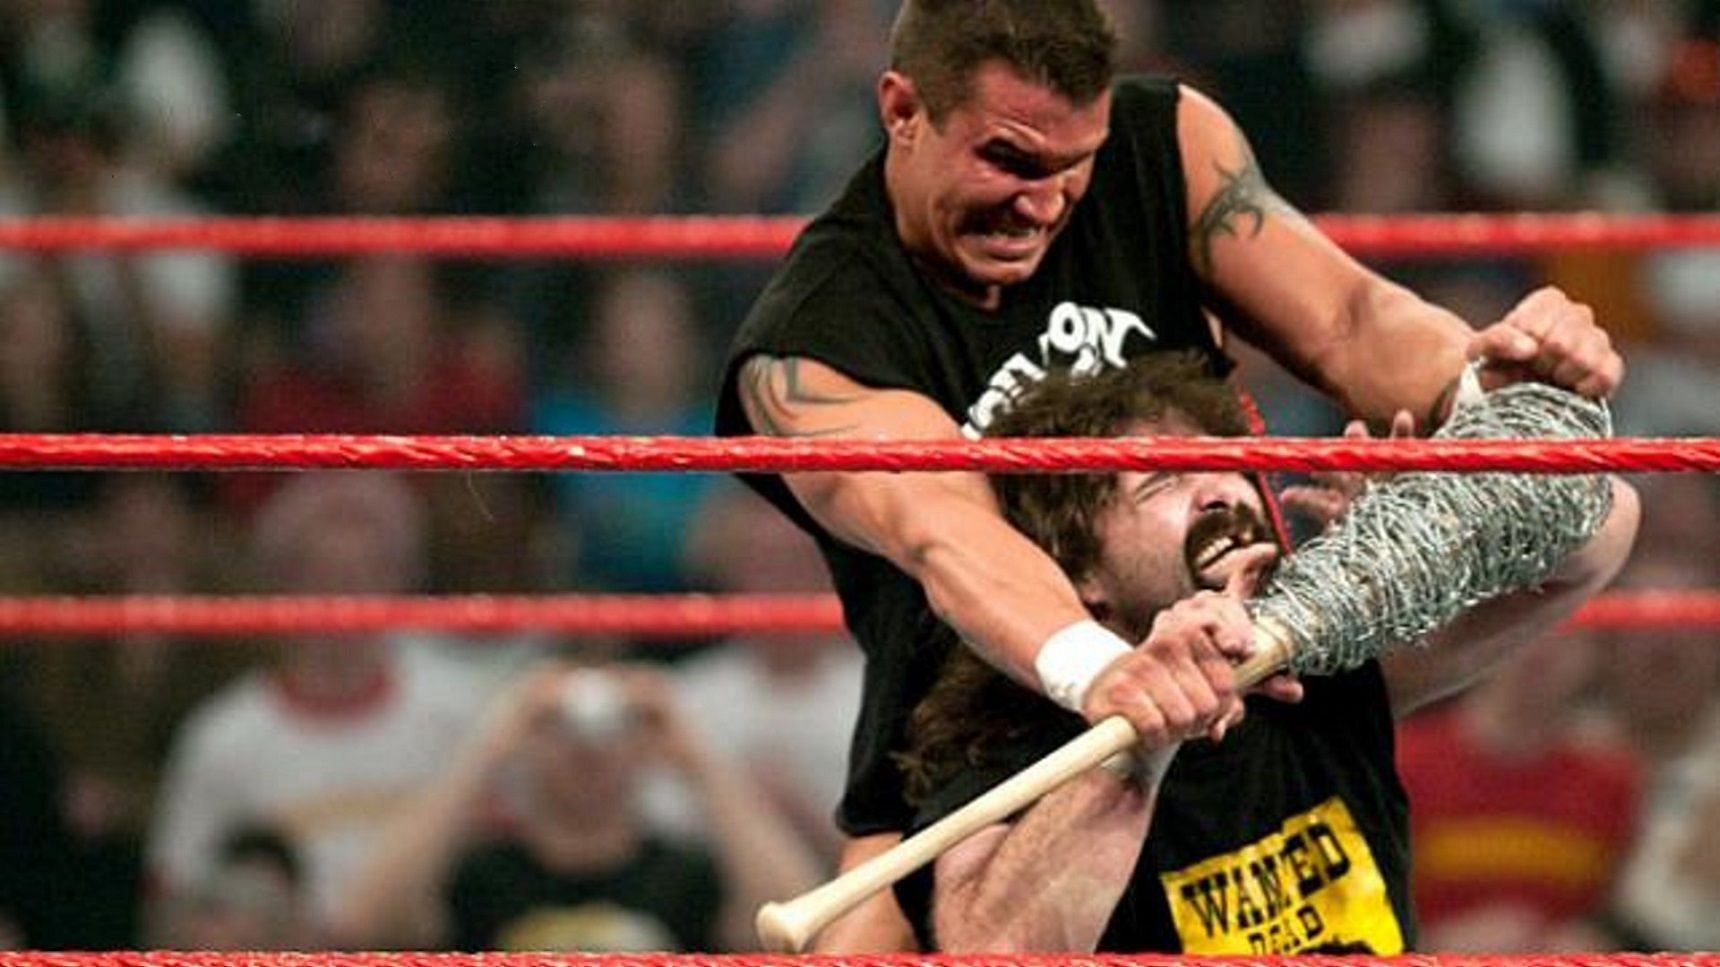 Mick Foley and Randy Orton had an epic rivalry